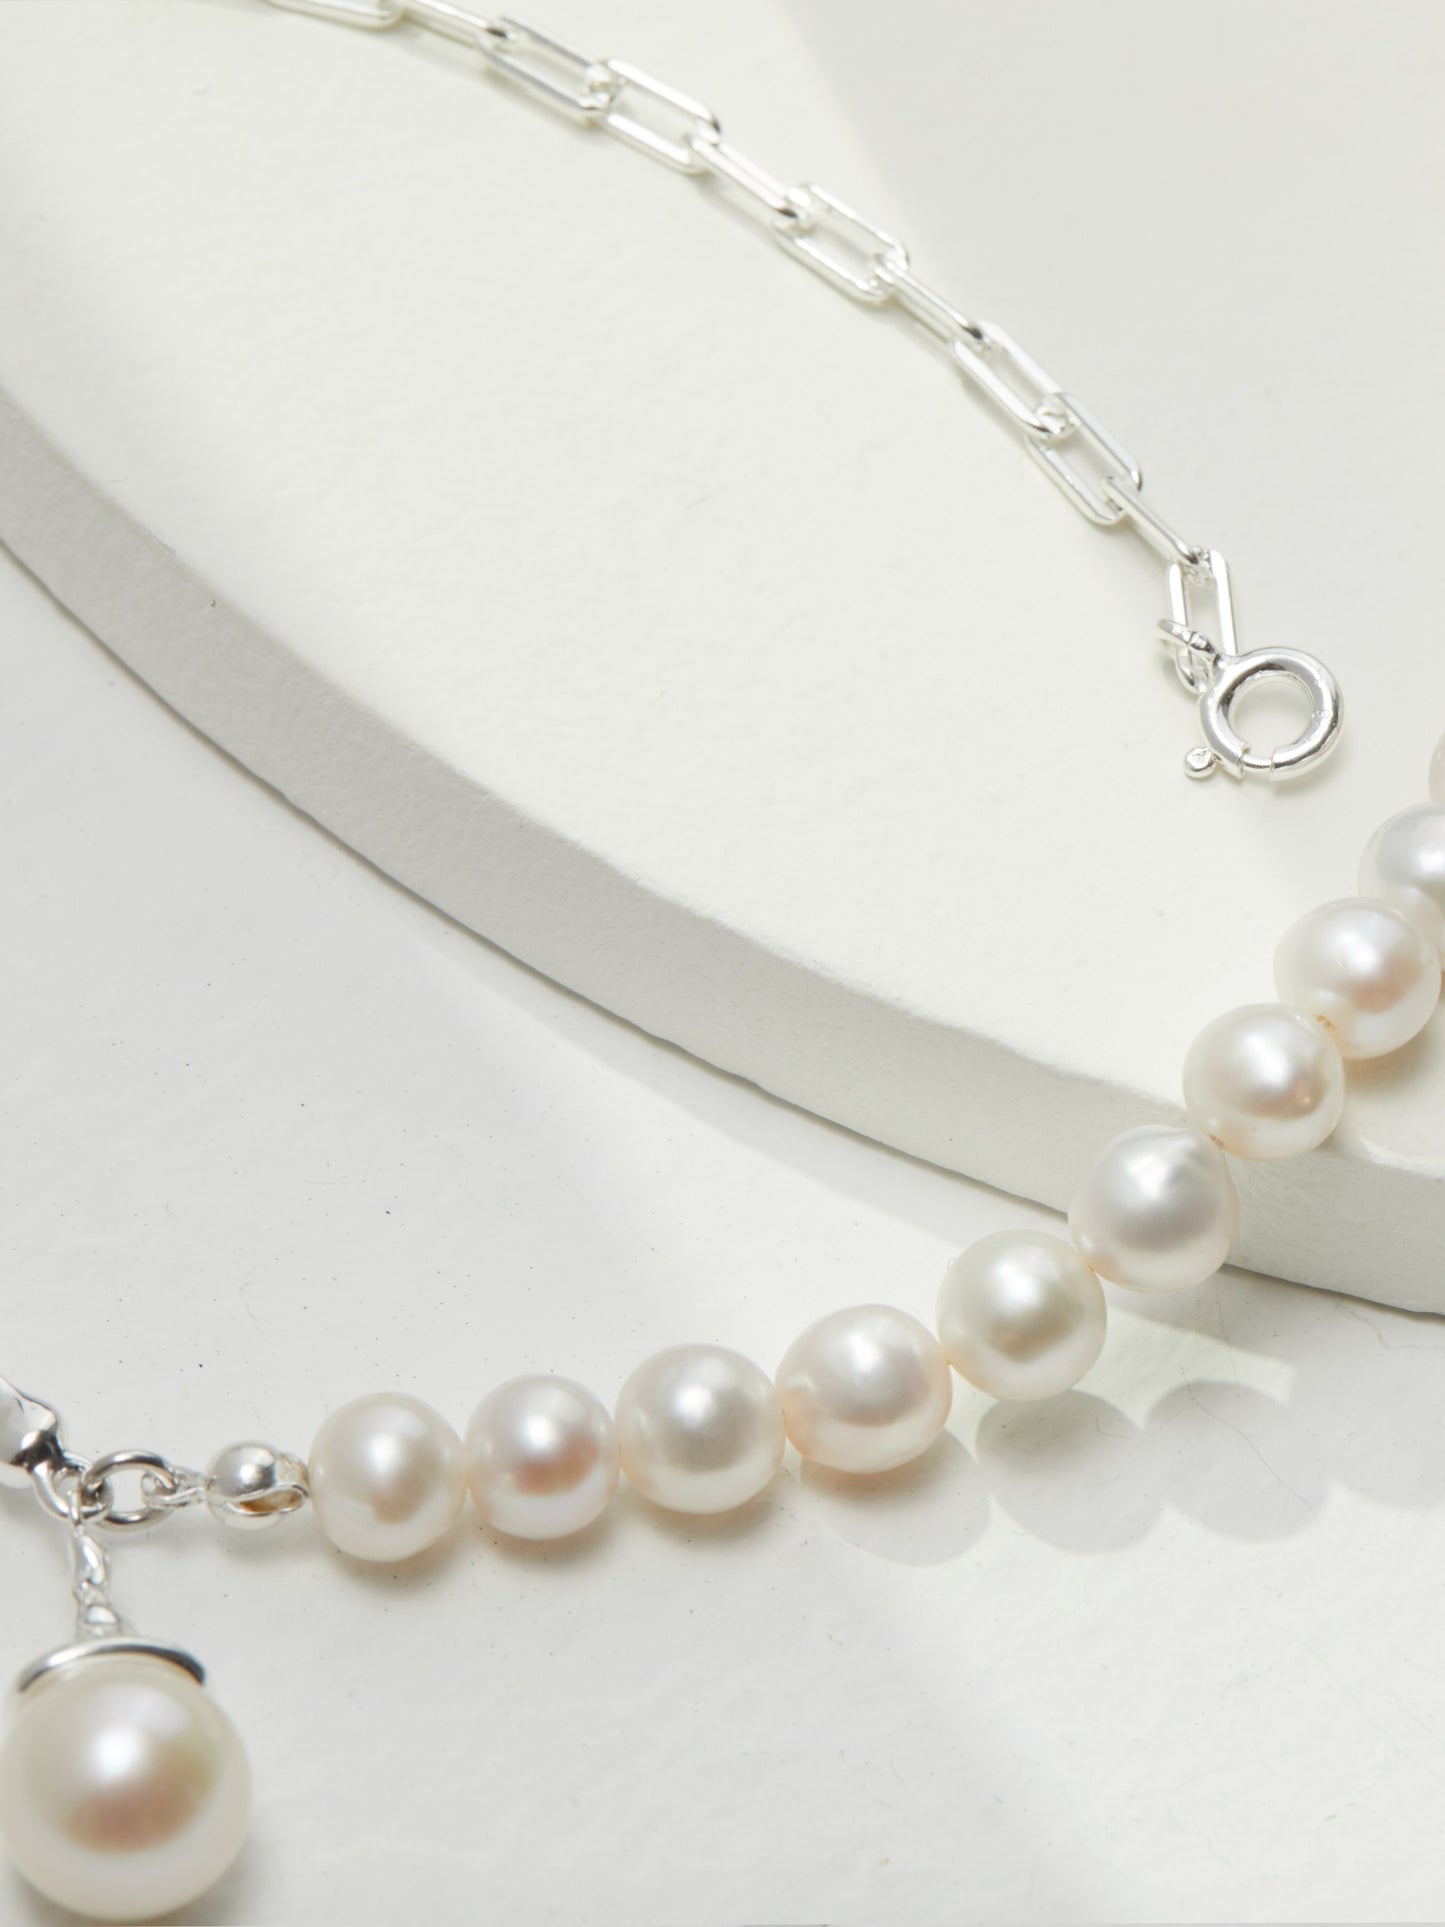 Timeless 10MM Large Pearl and Irregular Silver Tone Necklace and Earrings Set - Elegant Feminine Design